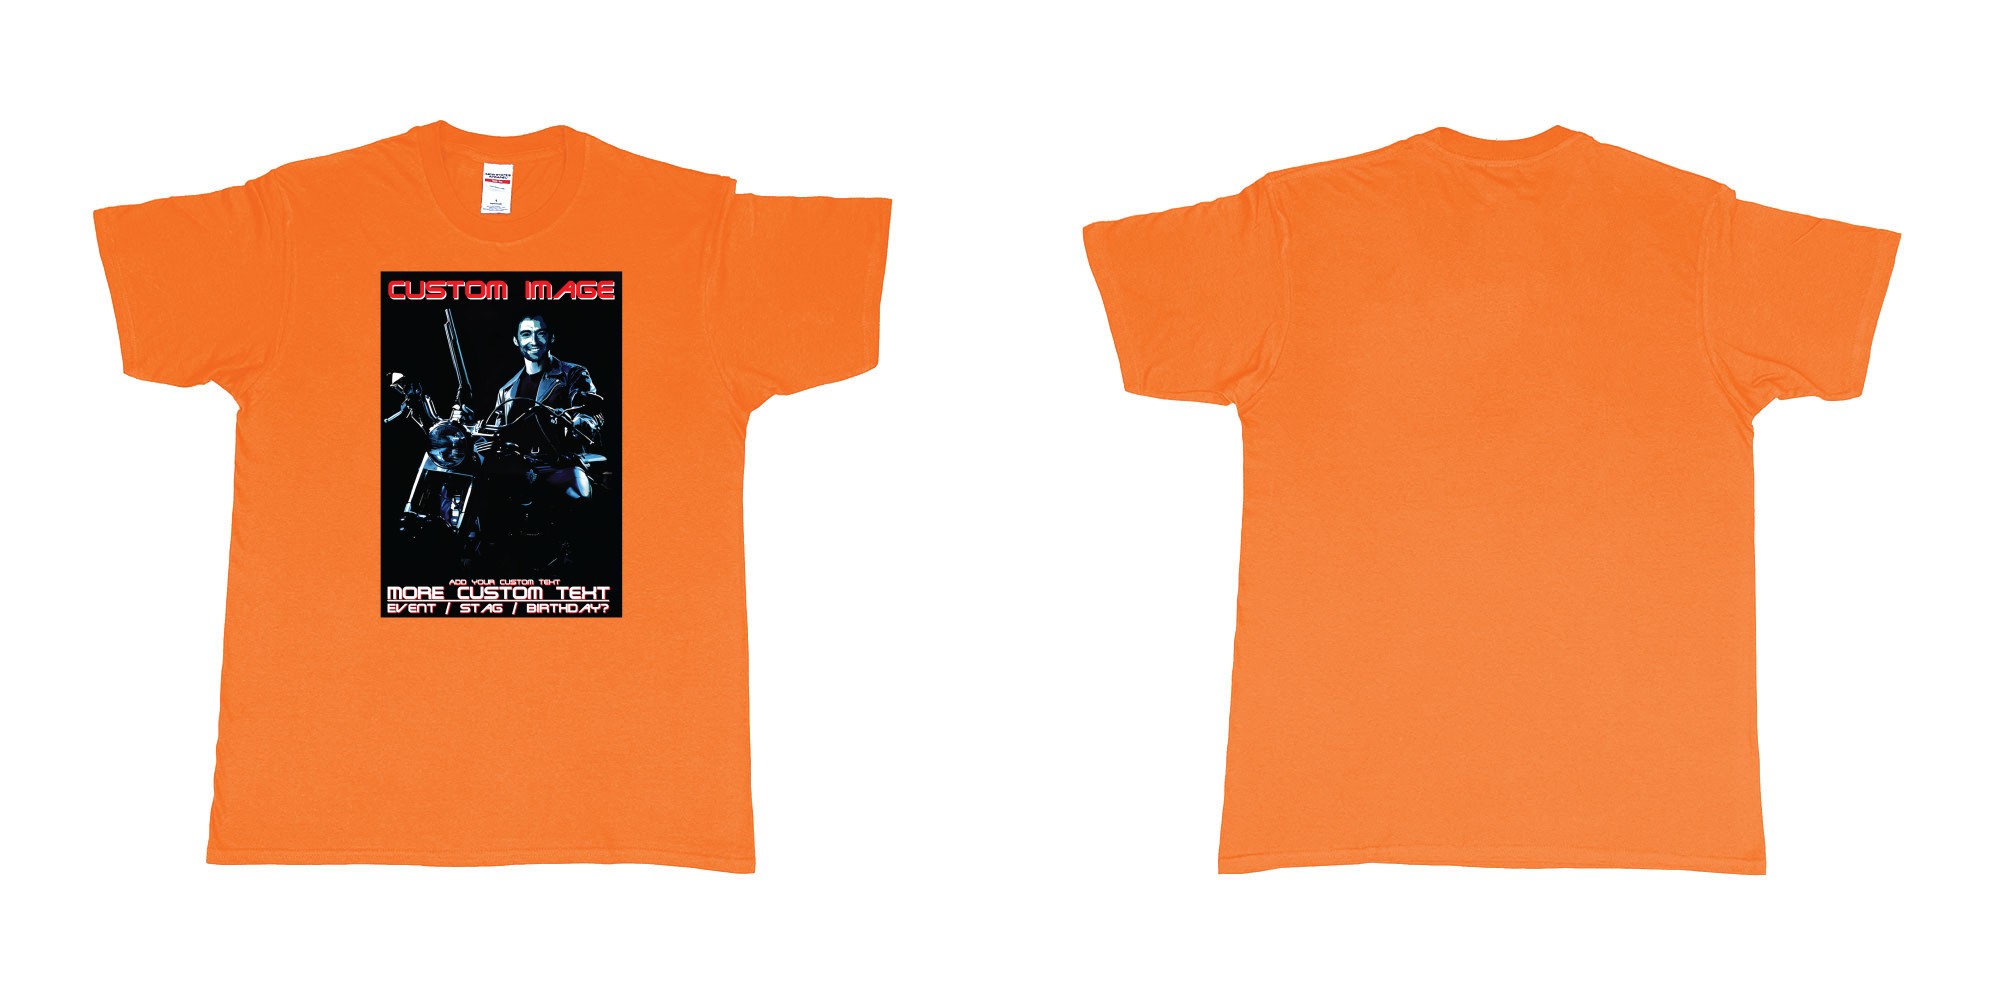 Custom tshirt design terminator 2 judgement day hugh jackman custom face in fabric color orange choice your own text made in Bali by The Pirate Way